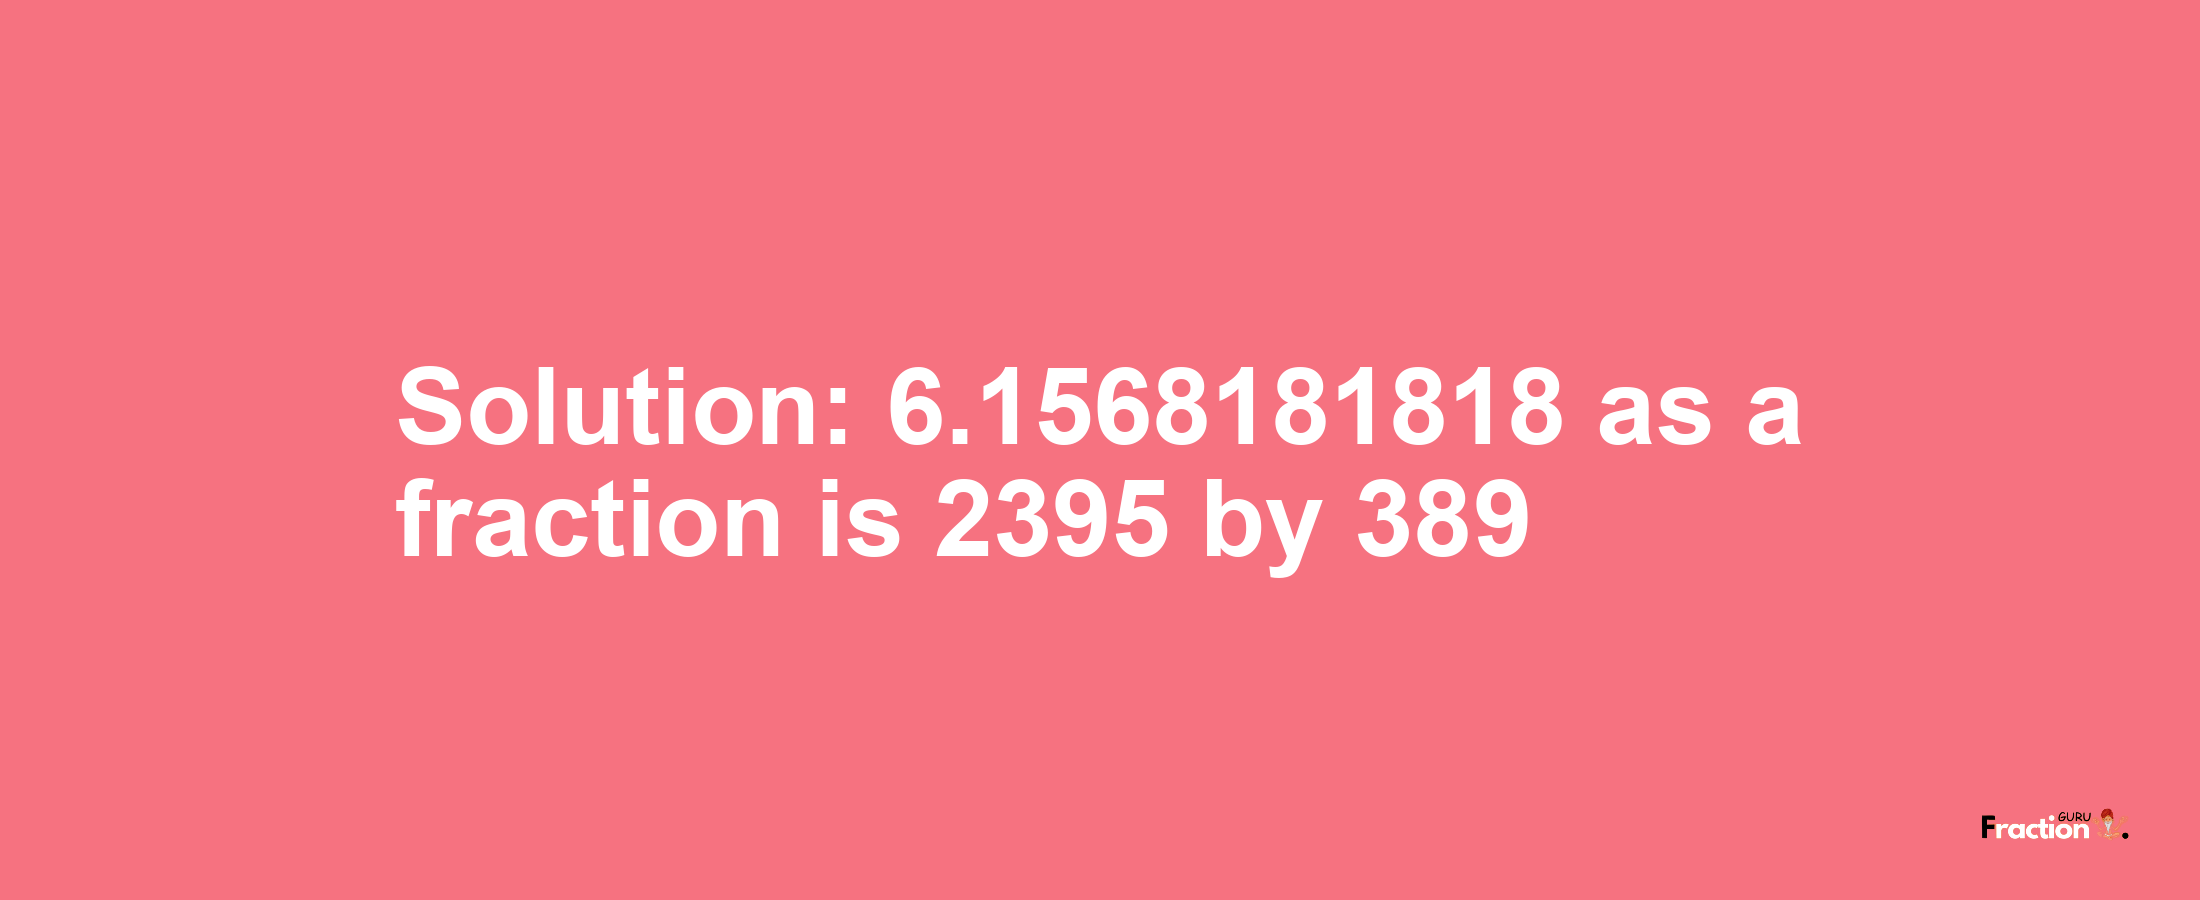 Solution:6.1568181818 as a fraction is 2395/389